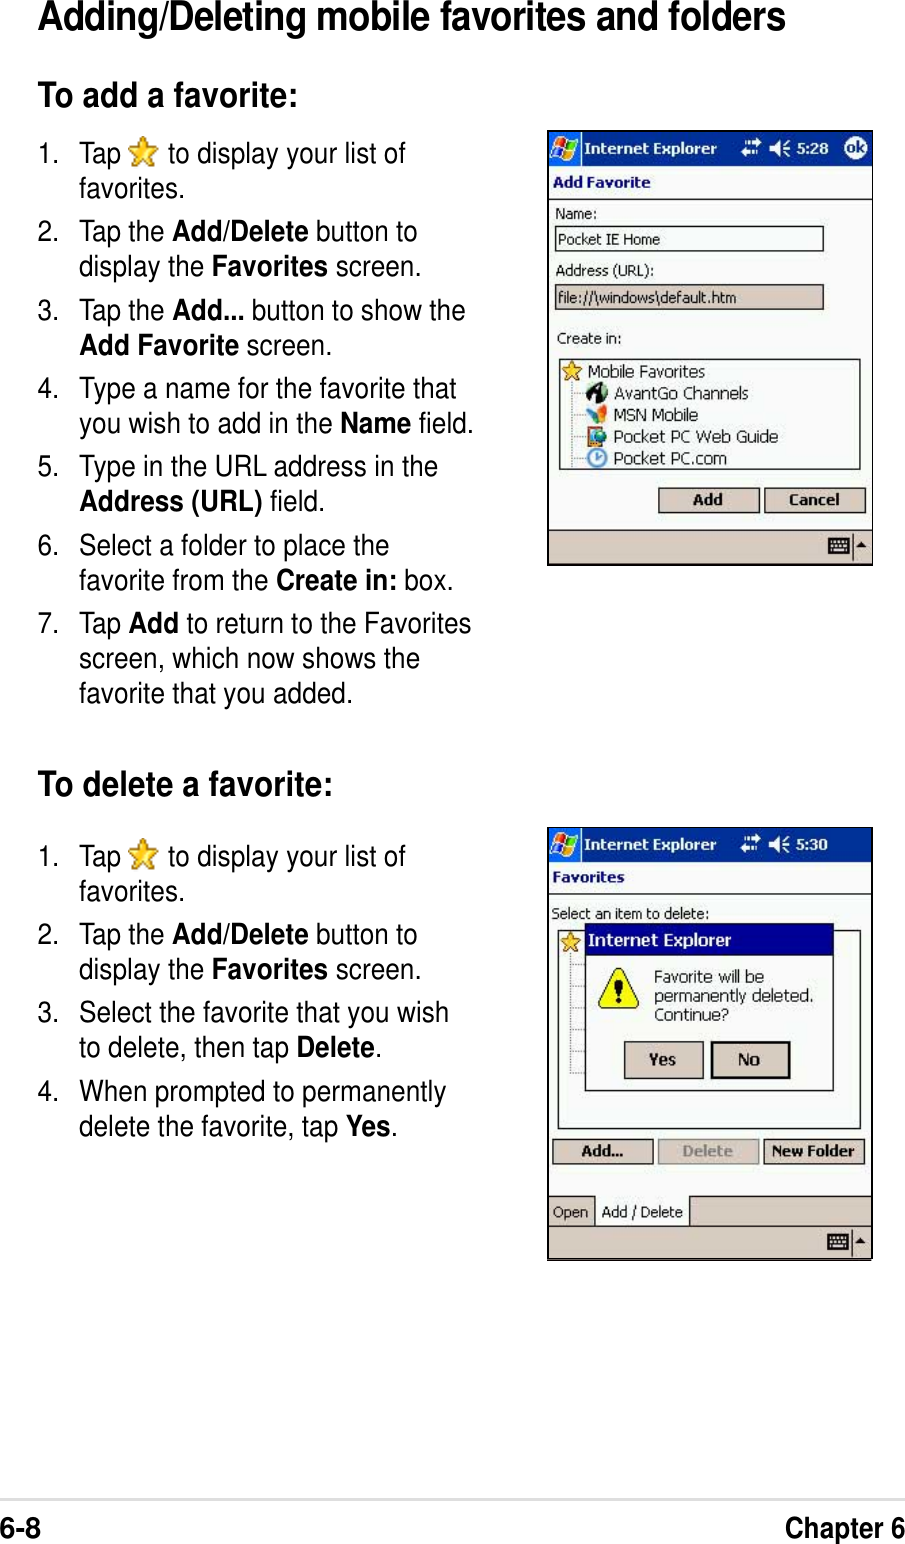 6-8Chapter 6Adding/Deleting mobile favorites and foldersTo add a favorite:1. Tap   to display your list offavorites.2. Tap the Add/Delete button todisplay the Favorites screen.3. Tap the Add... button to show theAdd Favorite screen.4. Type a name for the favorite thatyou wish to add in the Name field.5. Type in the URL address in theAddress (URL) field.6. Select a folder to place thefavorite from the Create in: box.7. Tap Add to return to the Favoritesscreen, which now shows thefavorite that you added.To delete a favorite:1. Tap   to display your list offavorites.2. Tap the Add/Delete button todisplay the Favorites screen.3. Select the favorite that you wishto delete, then tap Delete.4. When prompted to permanentlydelete the favorite, tap Yes.